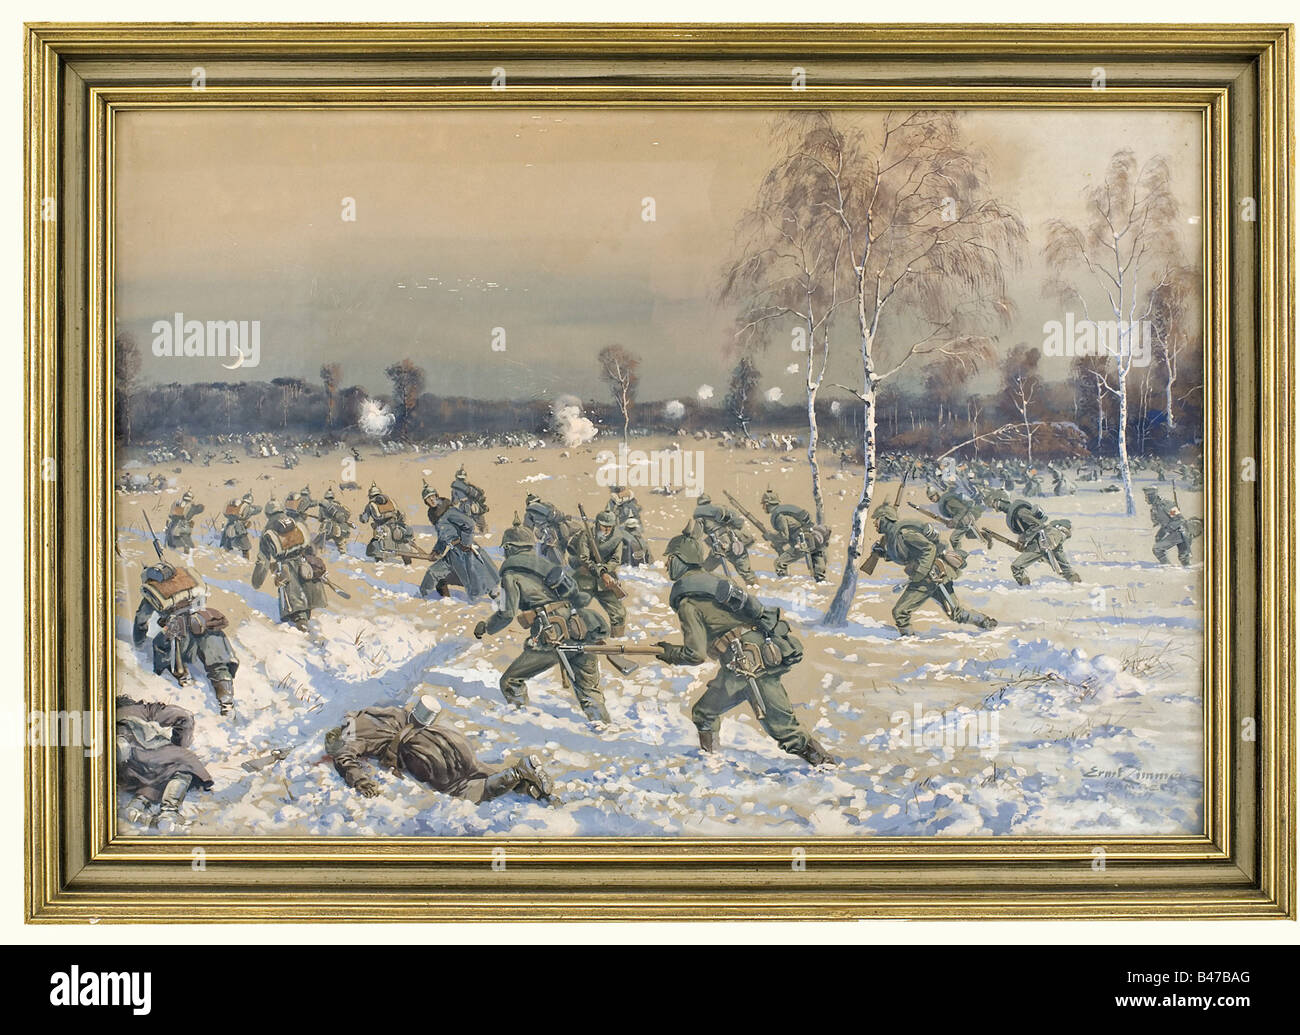 Ernst Zimmer (1864 - 1924) - 'Attacking infantry at the Masurian front'., German infantry attacking in the twilight on a snow-covered plain. Gouache on paper, signed on the lower right 'Ernst Zimmer Bamberg 1917'. Size of the picture 59 x 90 cm, under glass and framed (73 x 102 cm). Ernst Zimmer studied in Danzig and was a master student of Louis Braun in Munich. He specialised in military scenes, and also made various book illustrations. From 1903 he was resident in Bamberg (Thieme-Becker XXXVI, p. 503). historic, historical, people, 1910s, 20th century, First, Stock Photo